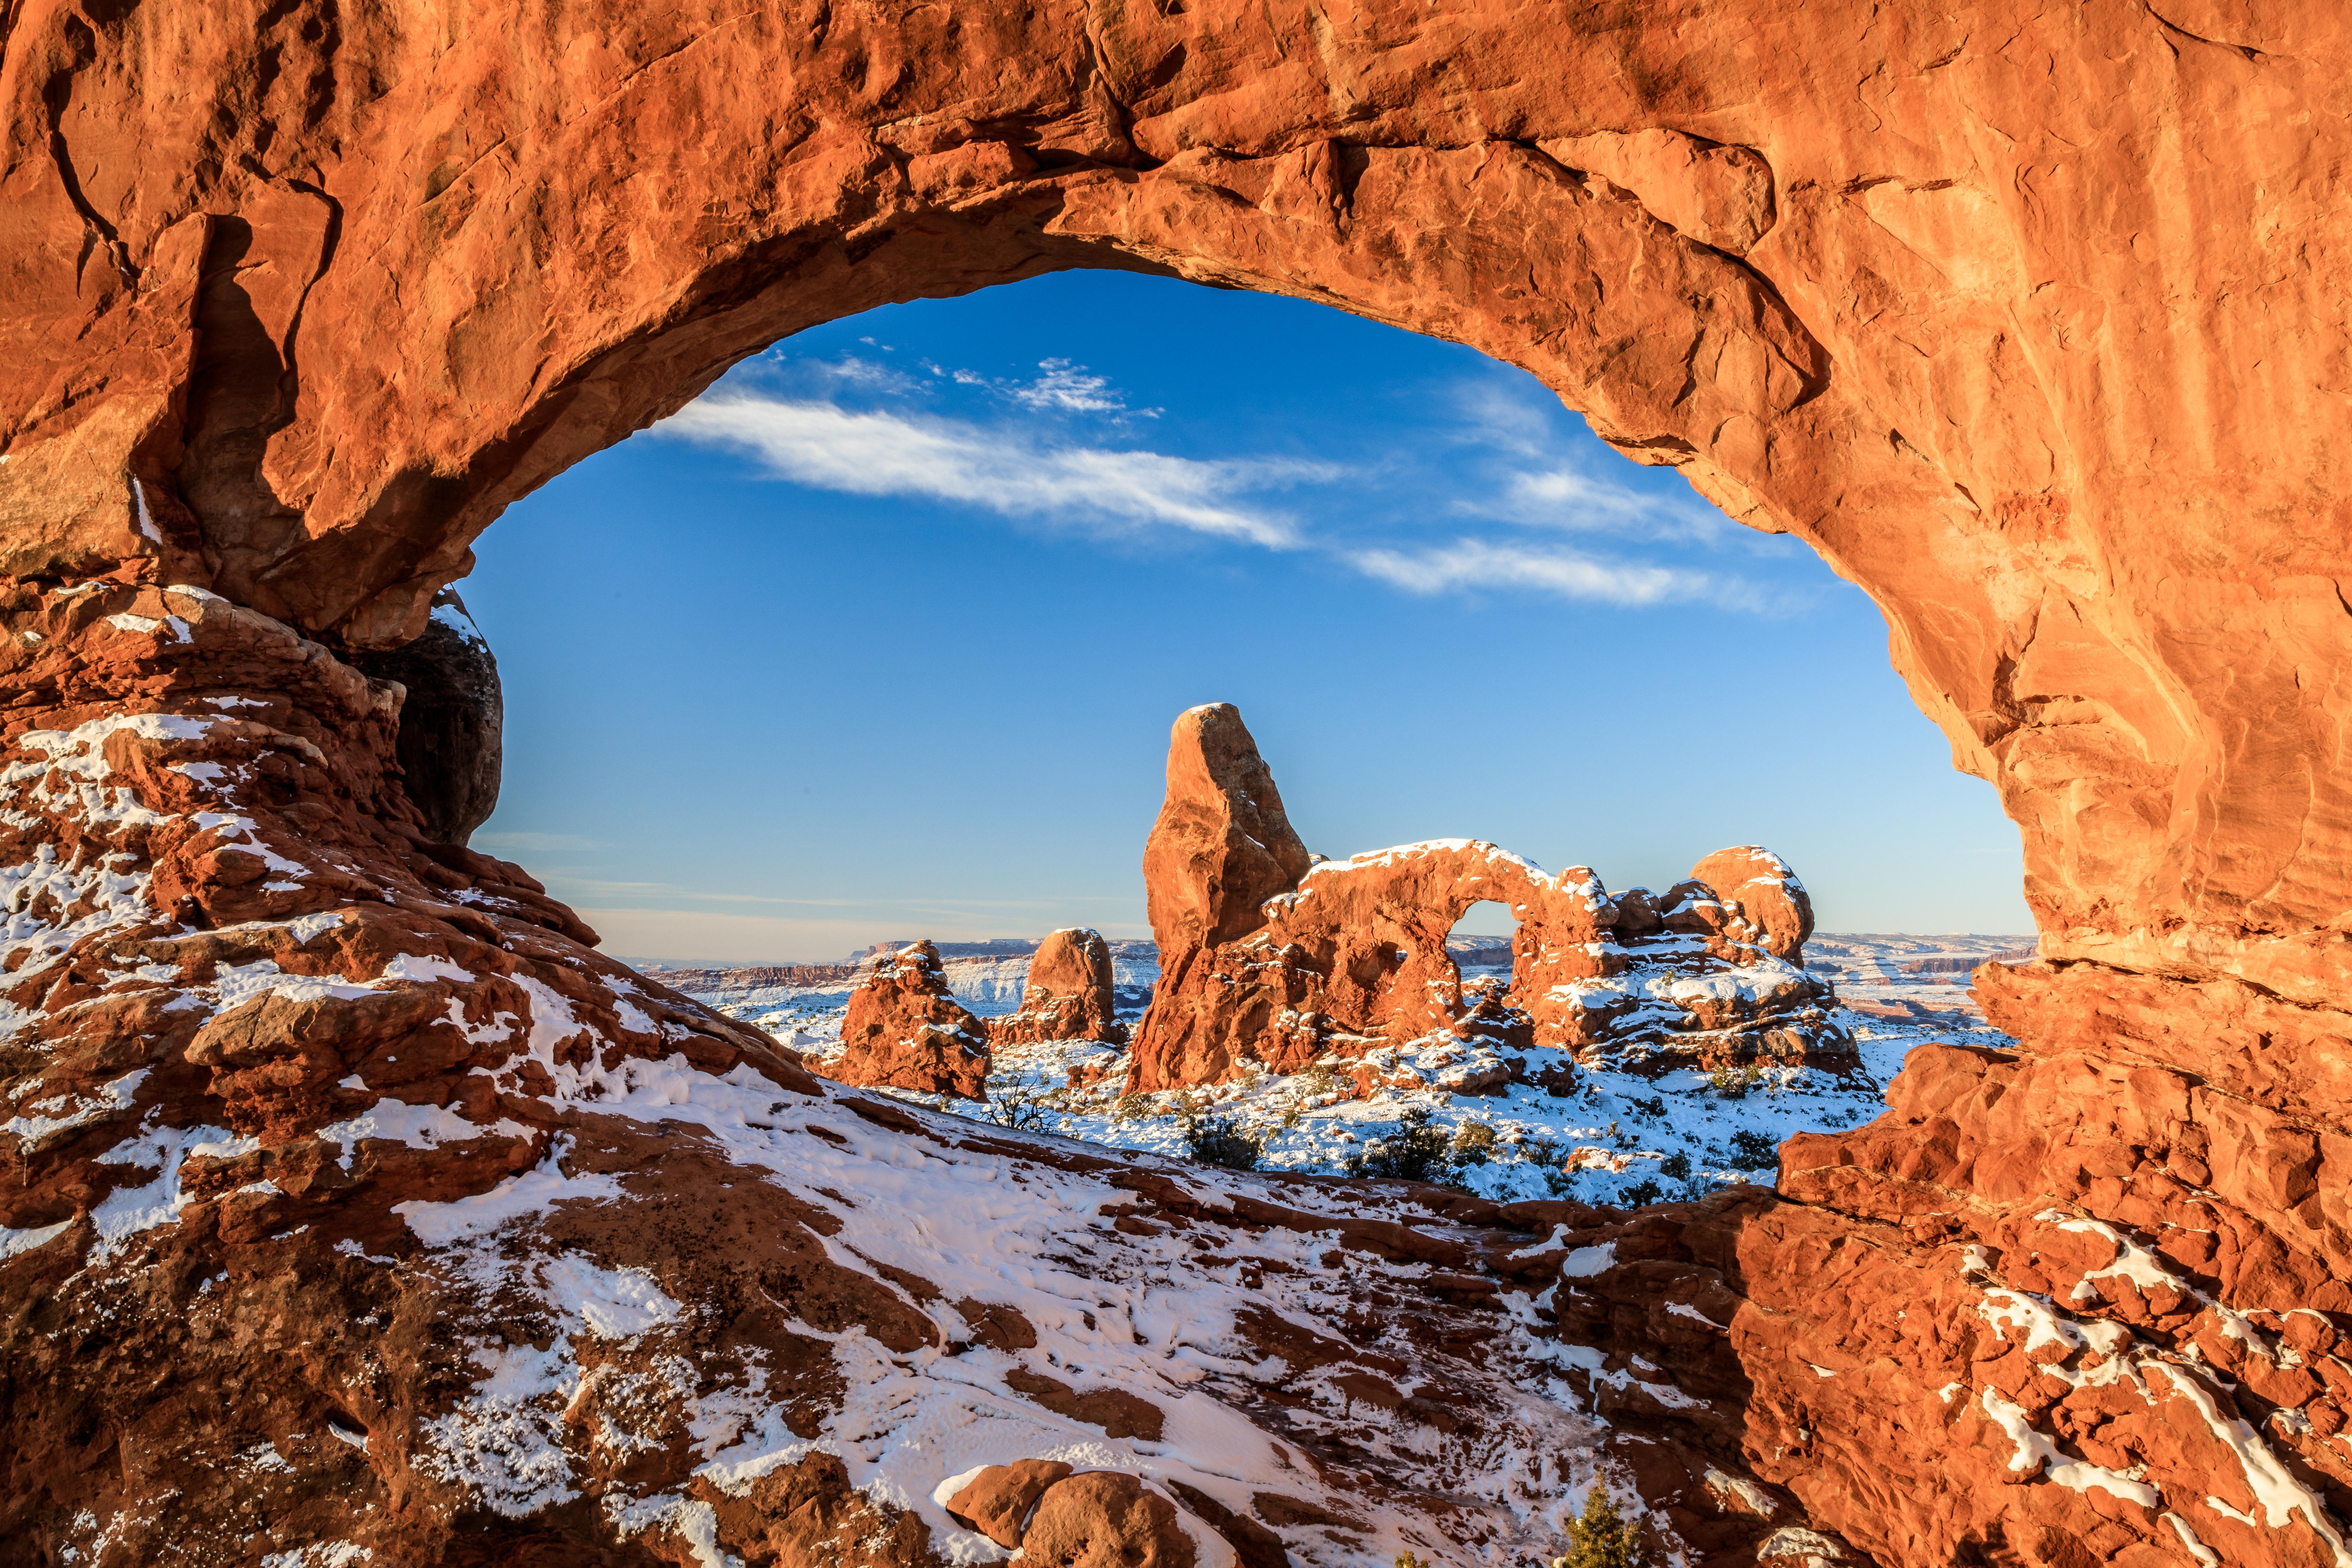 Dusting of snow on the red rocks of the North Window Arch and Turret Arch in Arches National Park, with a clear blue sky